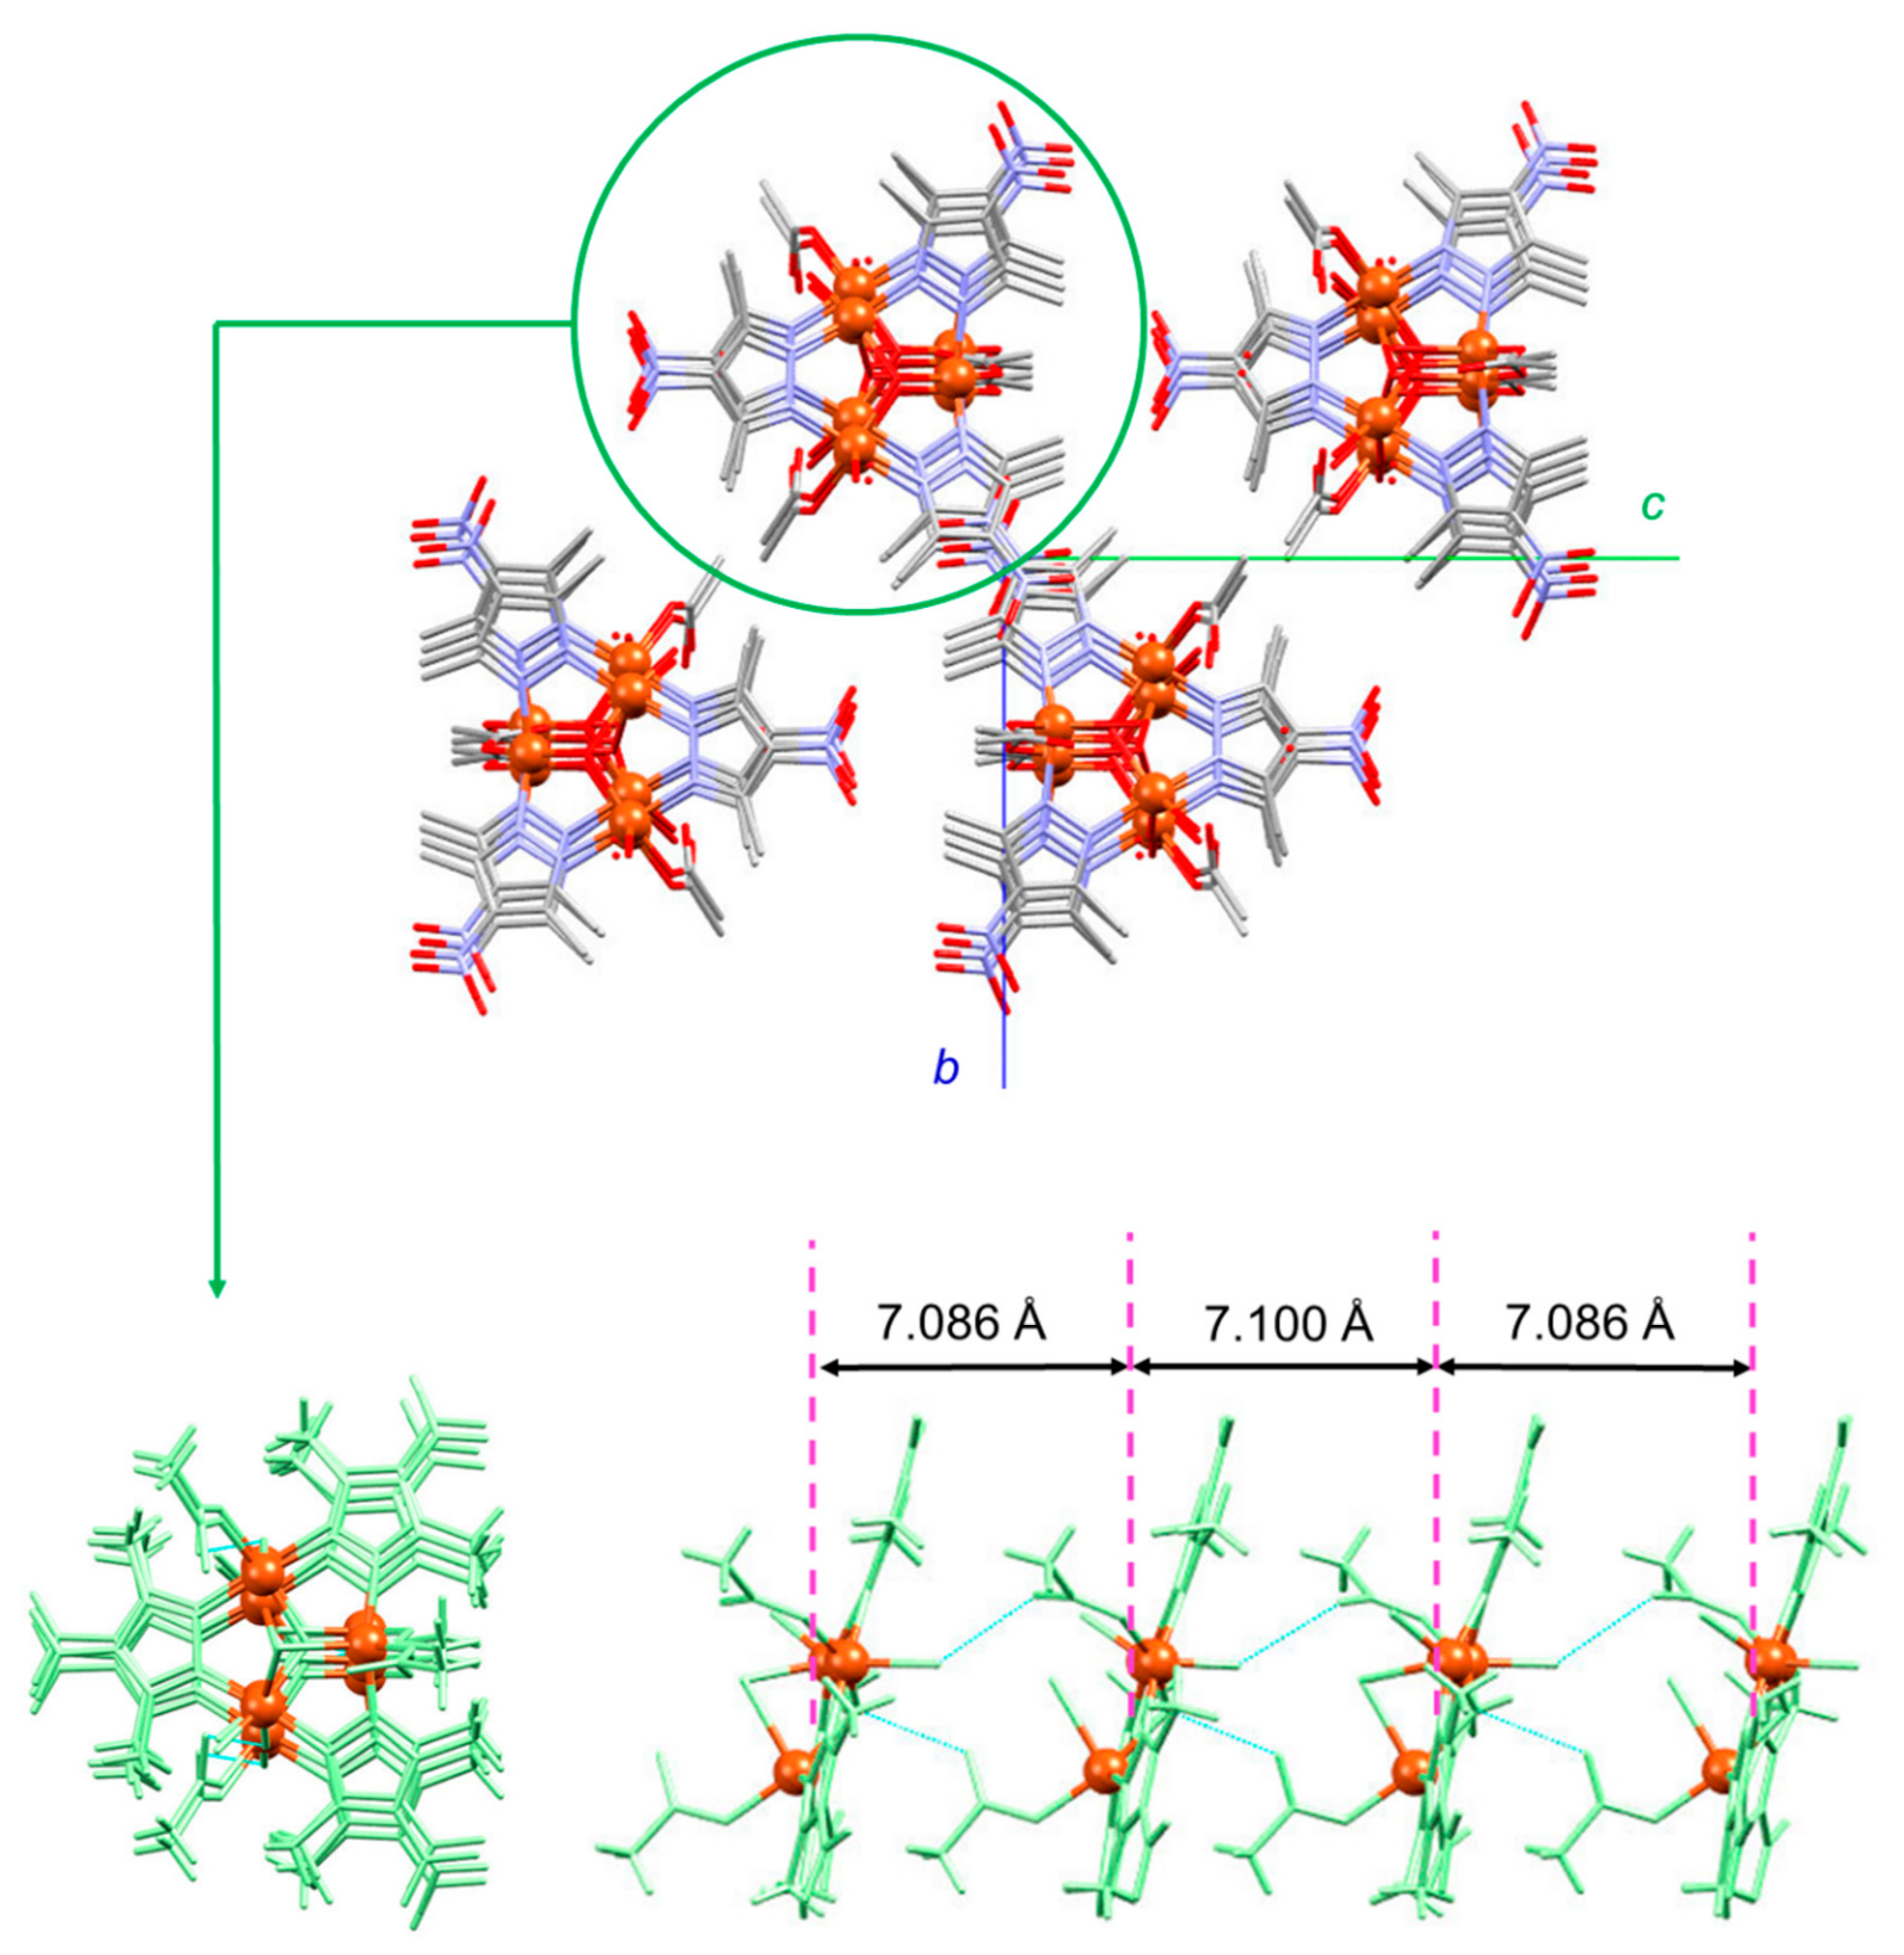 Chemistry Free Full Text New Syntheses Analytic Spin Hamiltonians Structural And Computational Characterization For A Series Of Tri Hexa And Hepta Nuclear Copper Ii Complexes With Prototypic Patterns Html